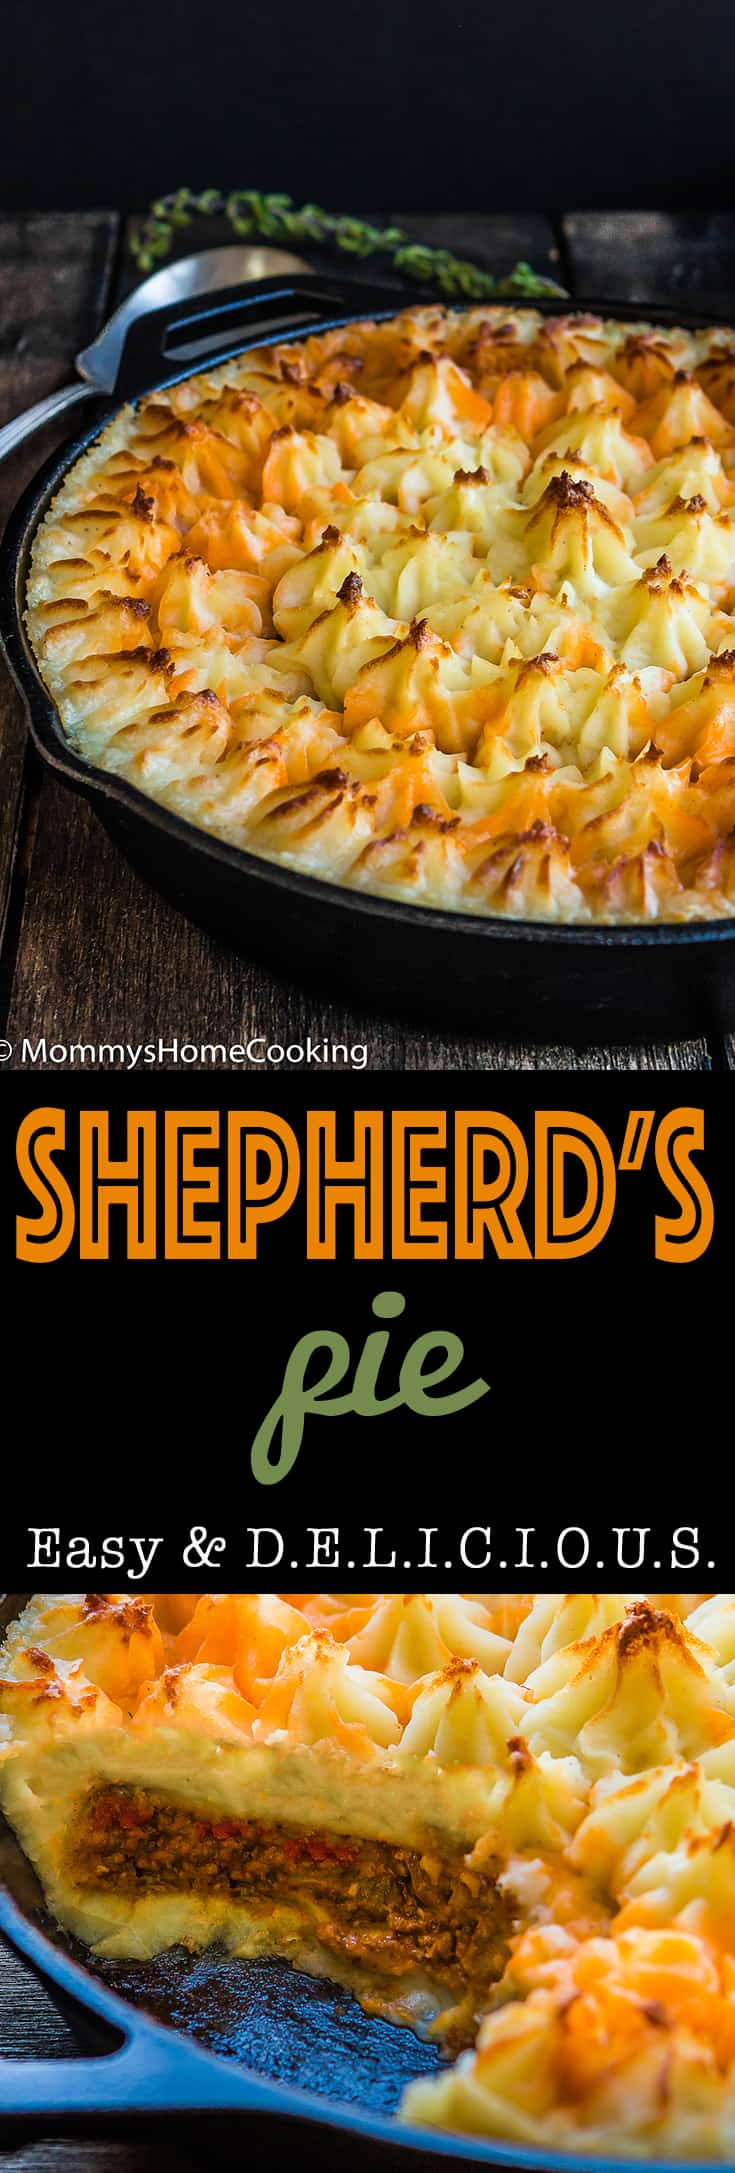 Shepherd's Pie is a complete, comforting, and scrumptious meal full of flavor! Made from scratch with Parmesan mashed potatoes and baked to perfection. https://mommyshomecooking.com